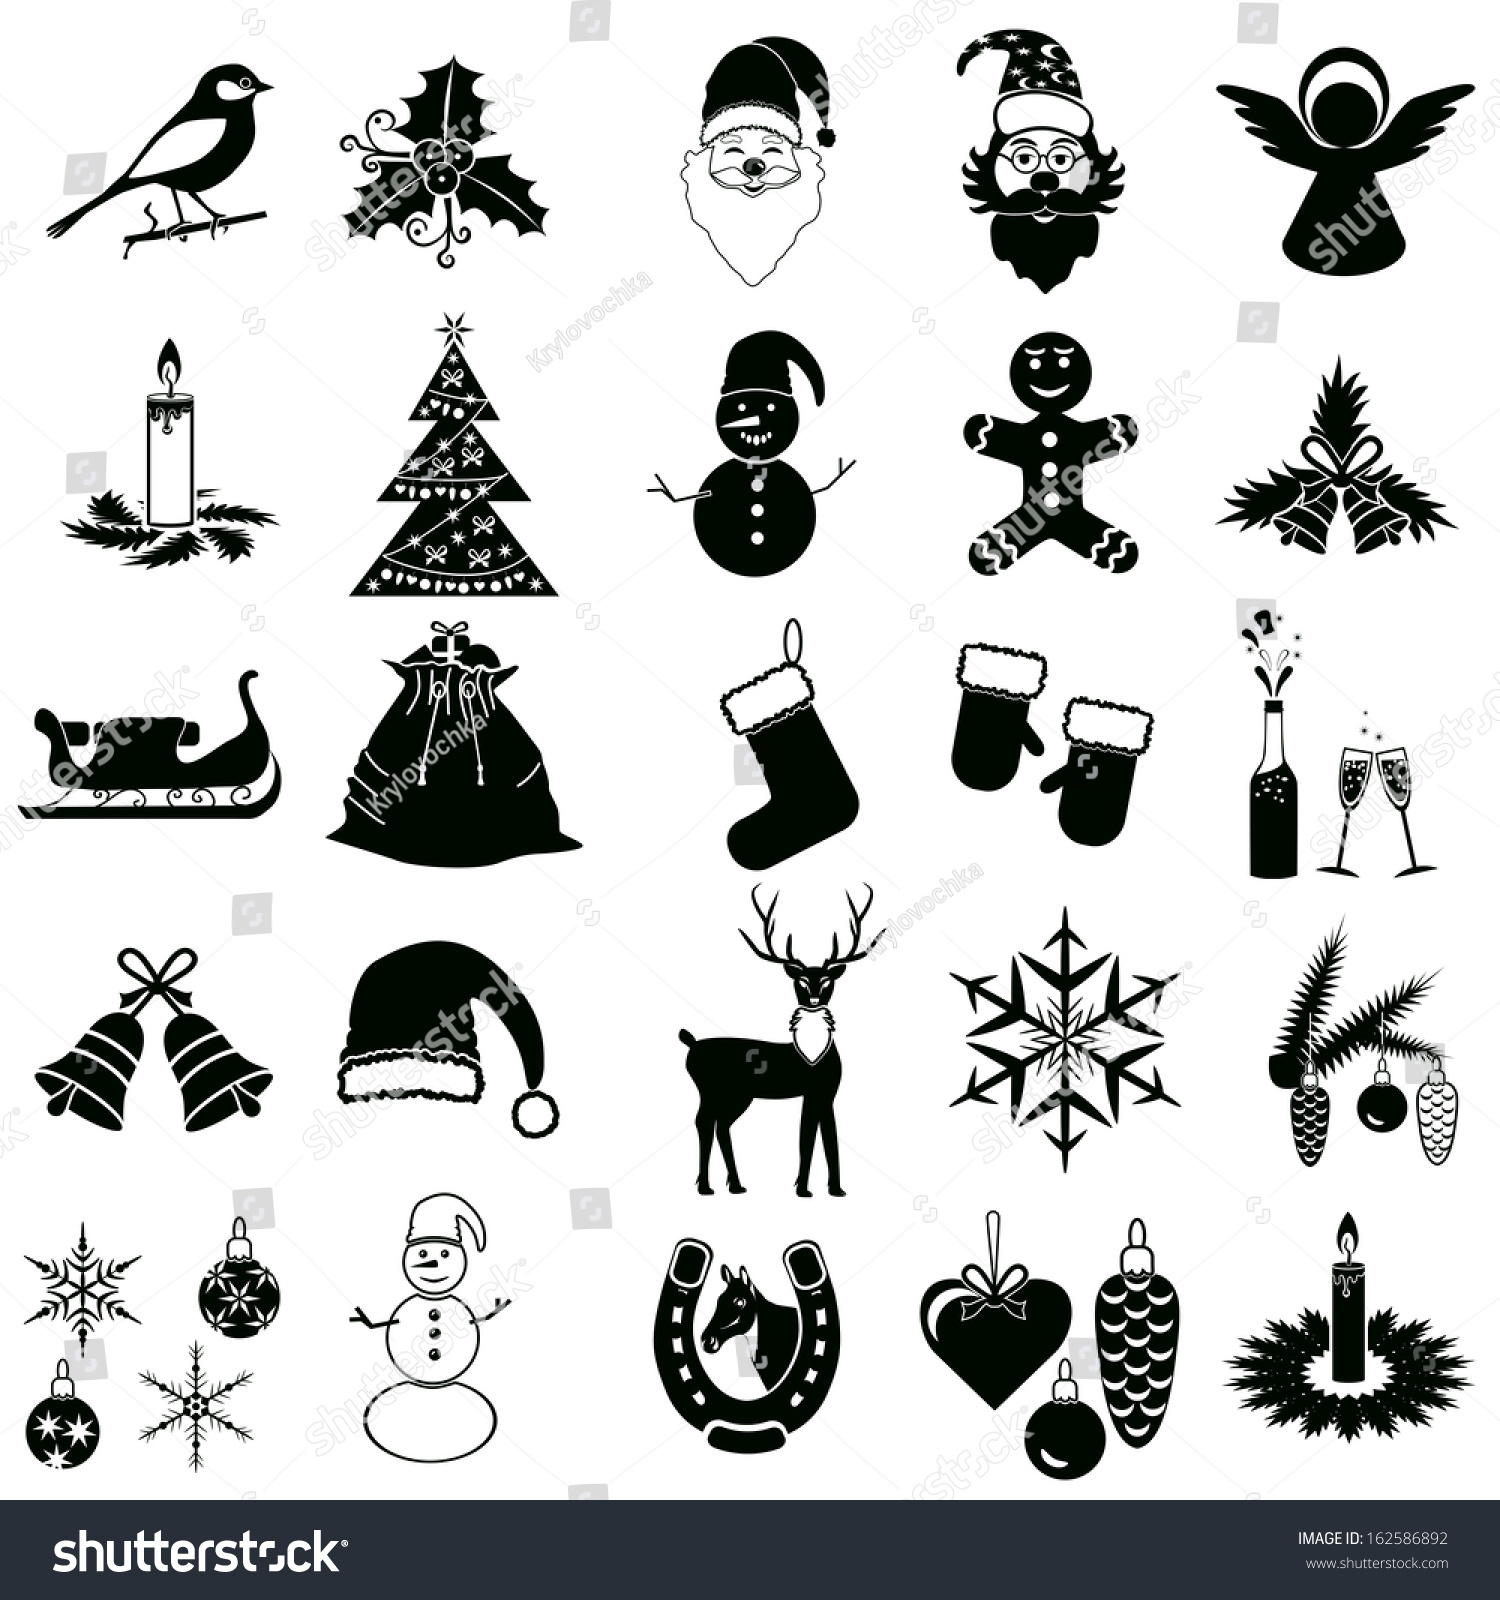 Christmas And Winter Icons Collection - Vector Silhouette - 162586892 ...